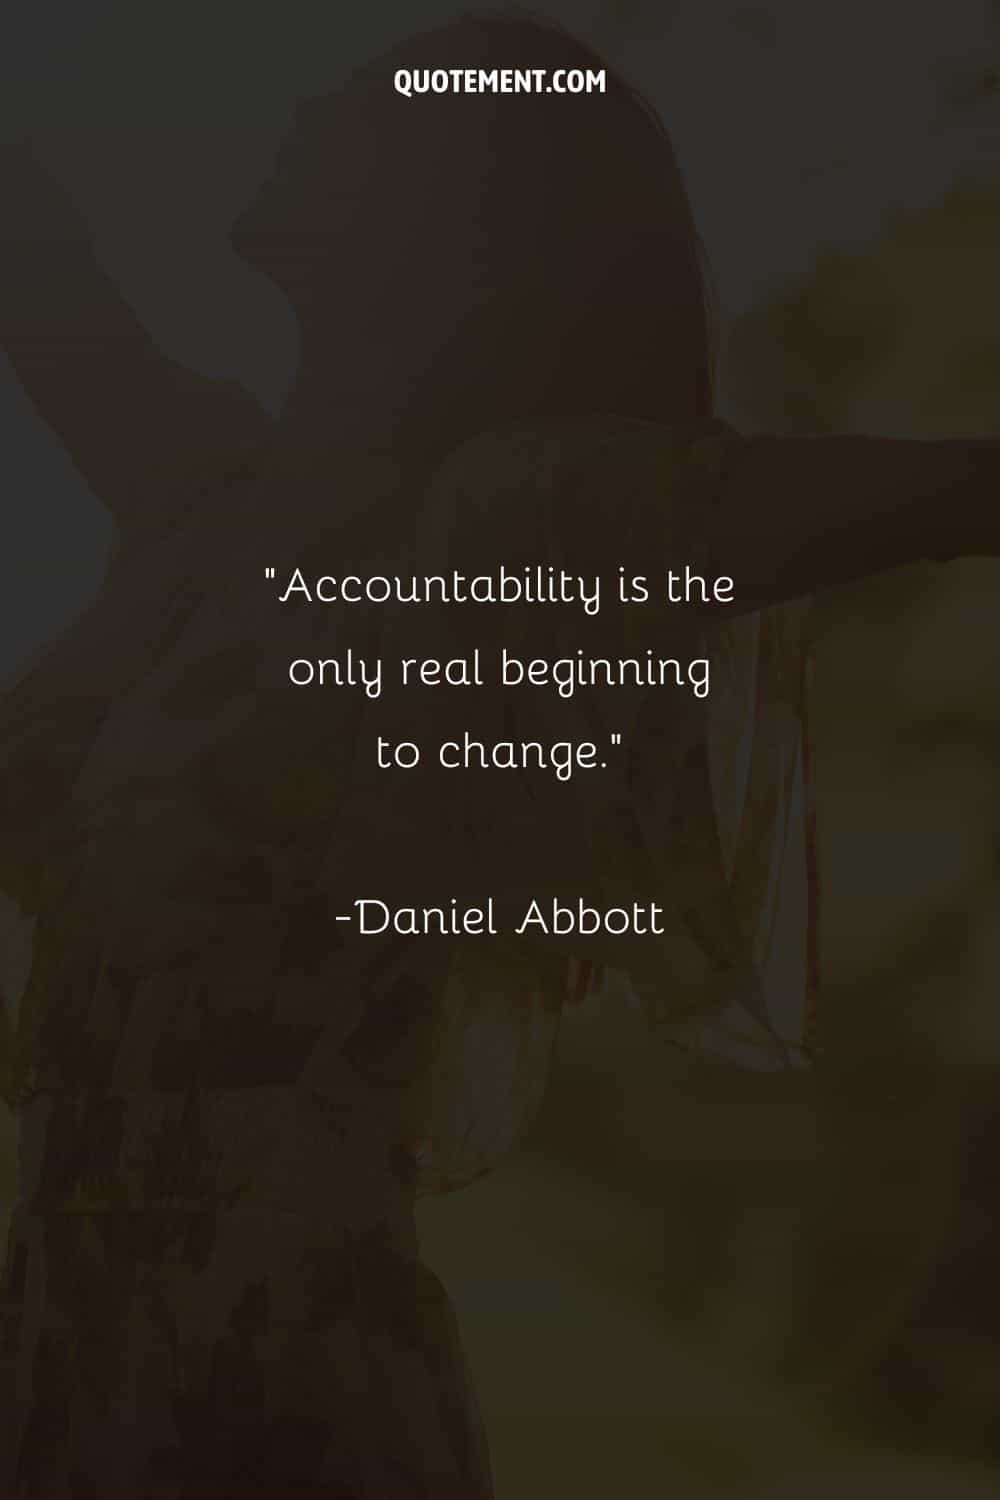 Image of a woman in a summer dress representing an accountability quote